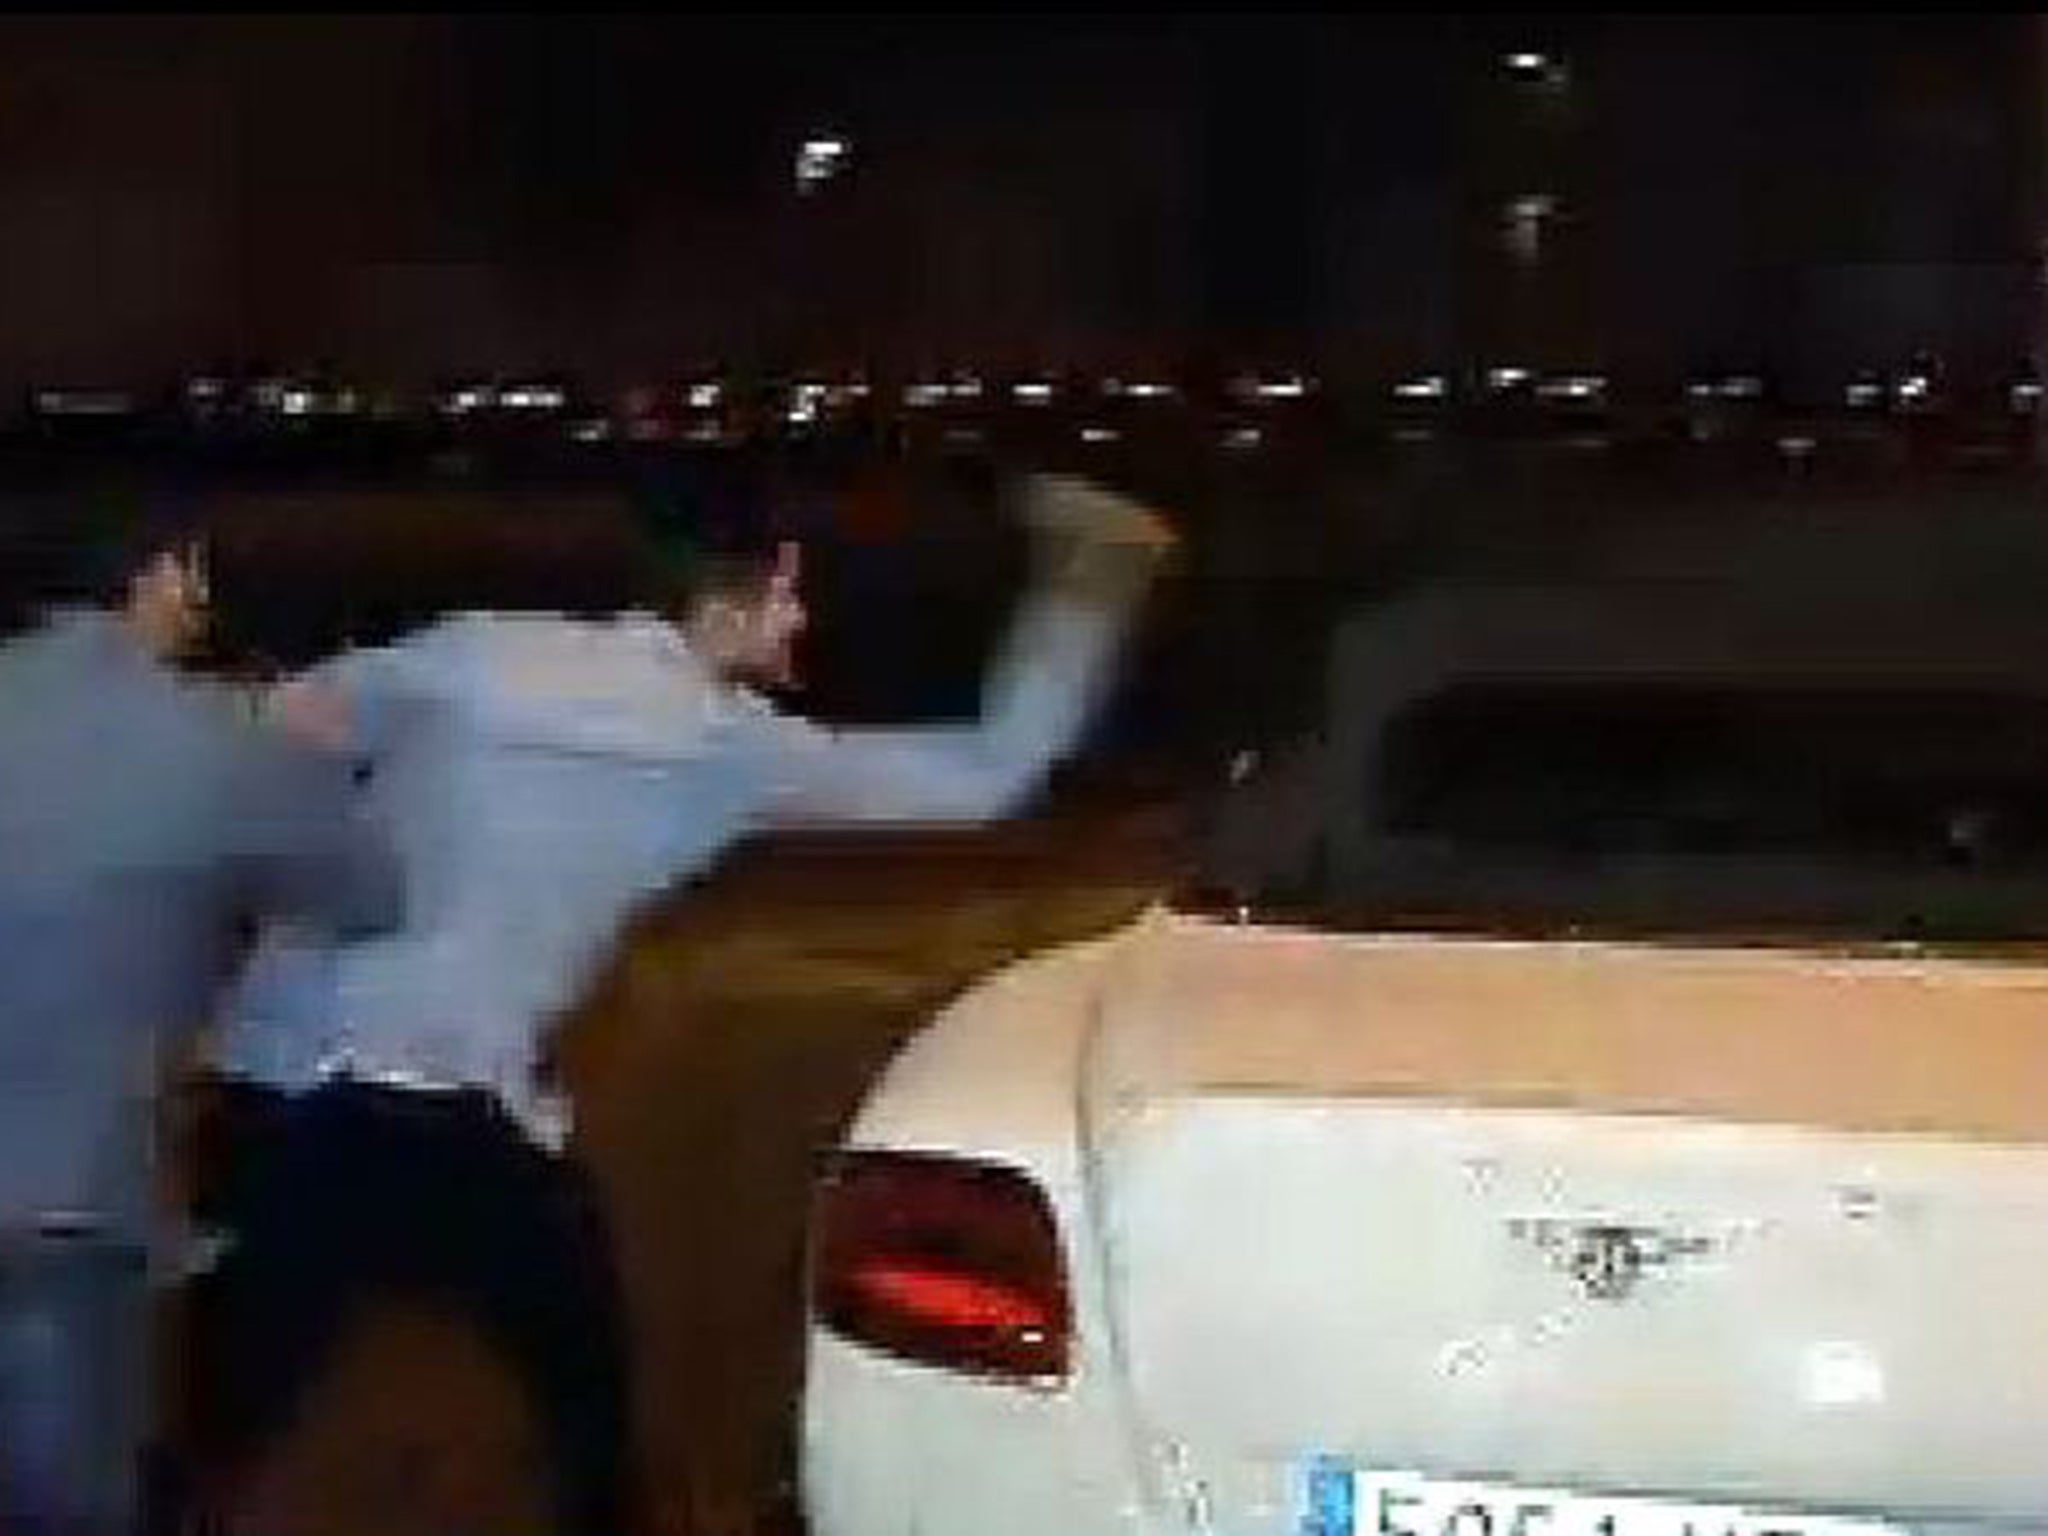 Bale's Bentley is attacked by fans